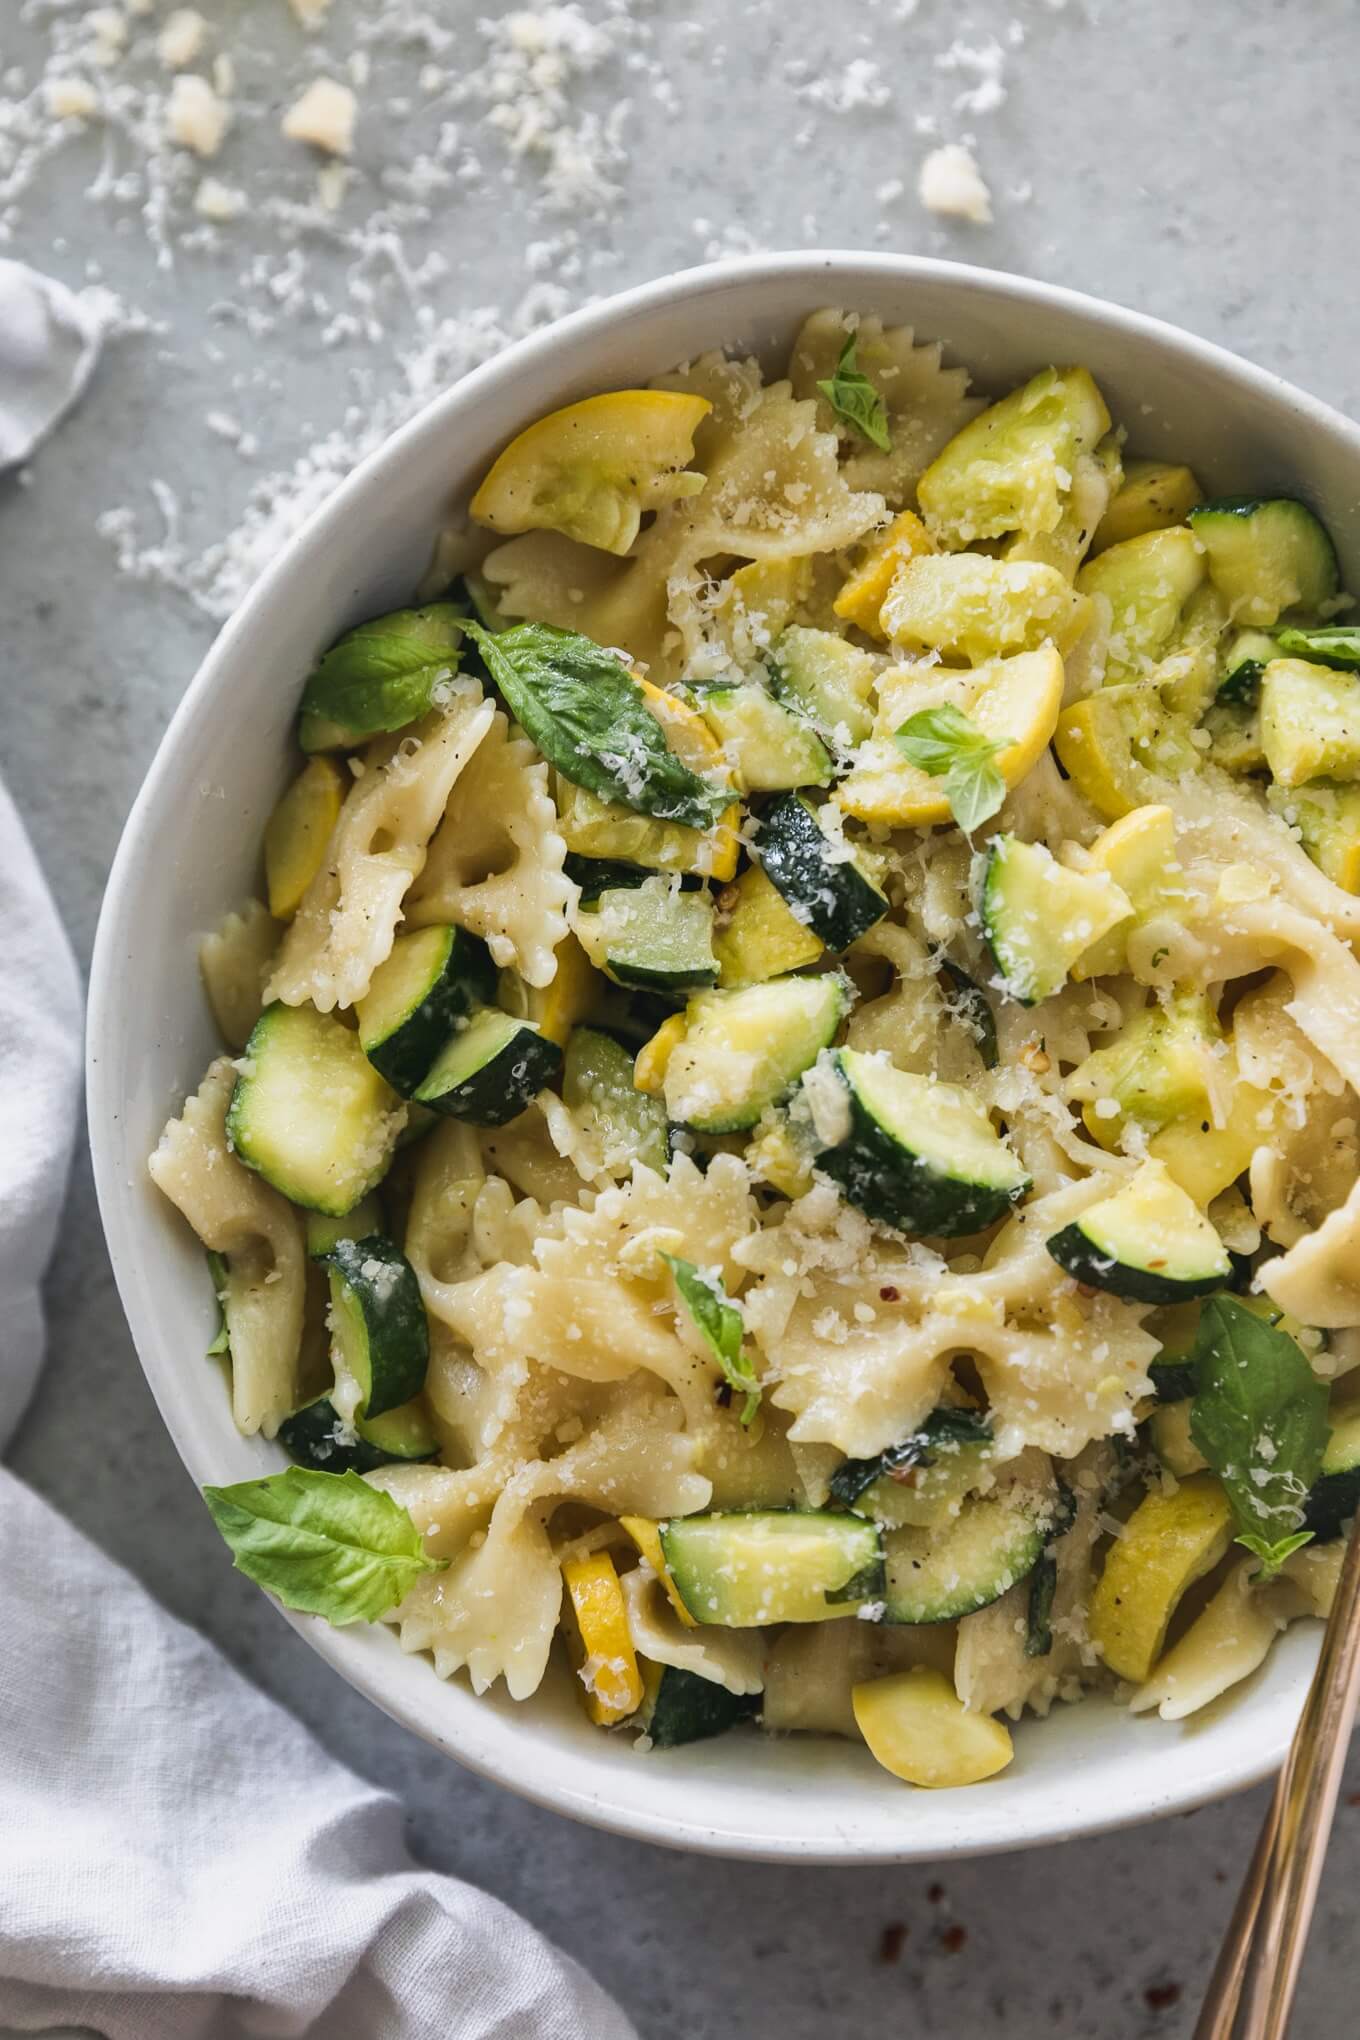 20 Best Summer Squash Dishes - Easy and Healthy Recipes